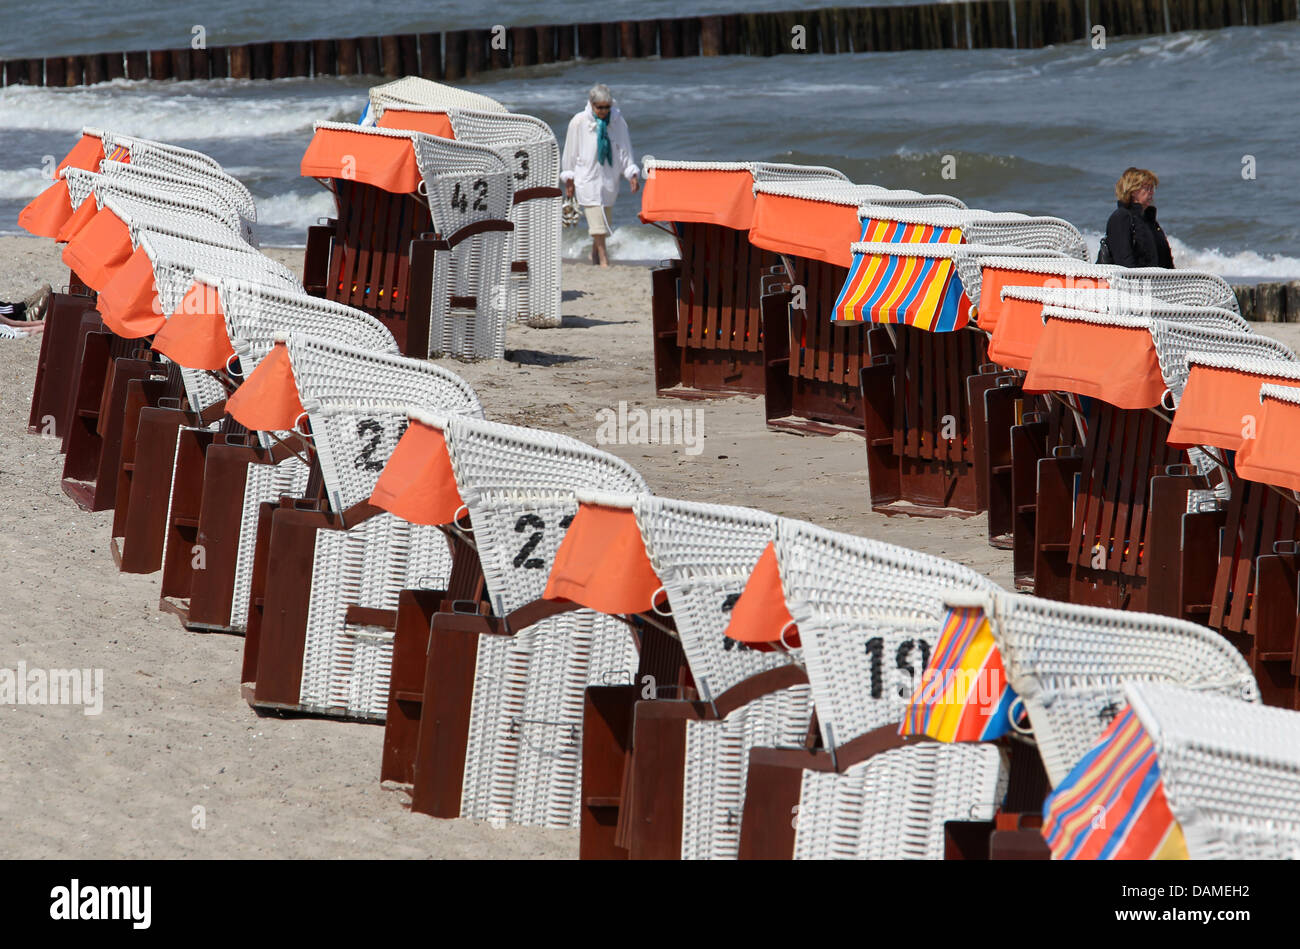 Beach chairs are situated at a beach at the Baltic Sea for visitors in Kuehlungsborn, Germany, 09 June 2011. Although the sun is shining, temperatures around 18 degrees Celsius and wind keep visitors away. Photo: Bernd Wuestneck Stock Photo